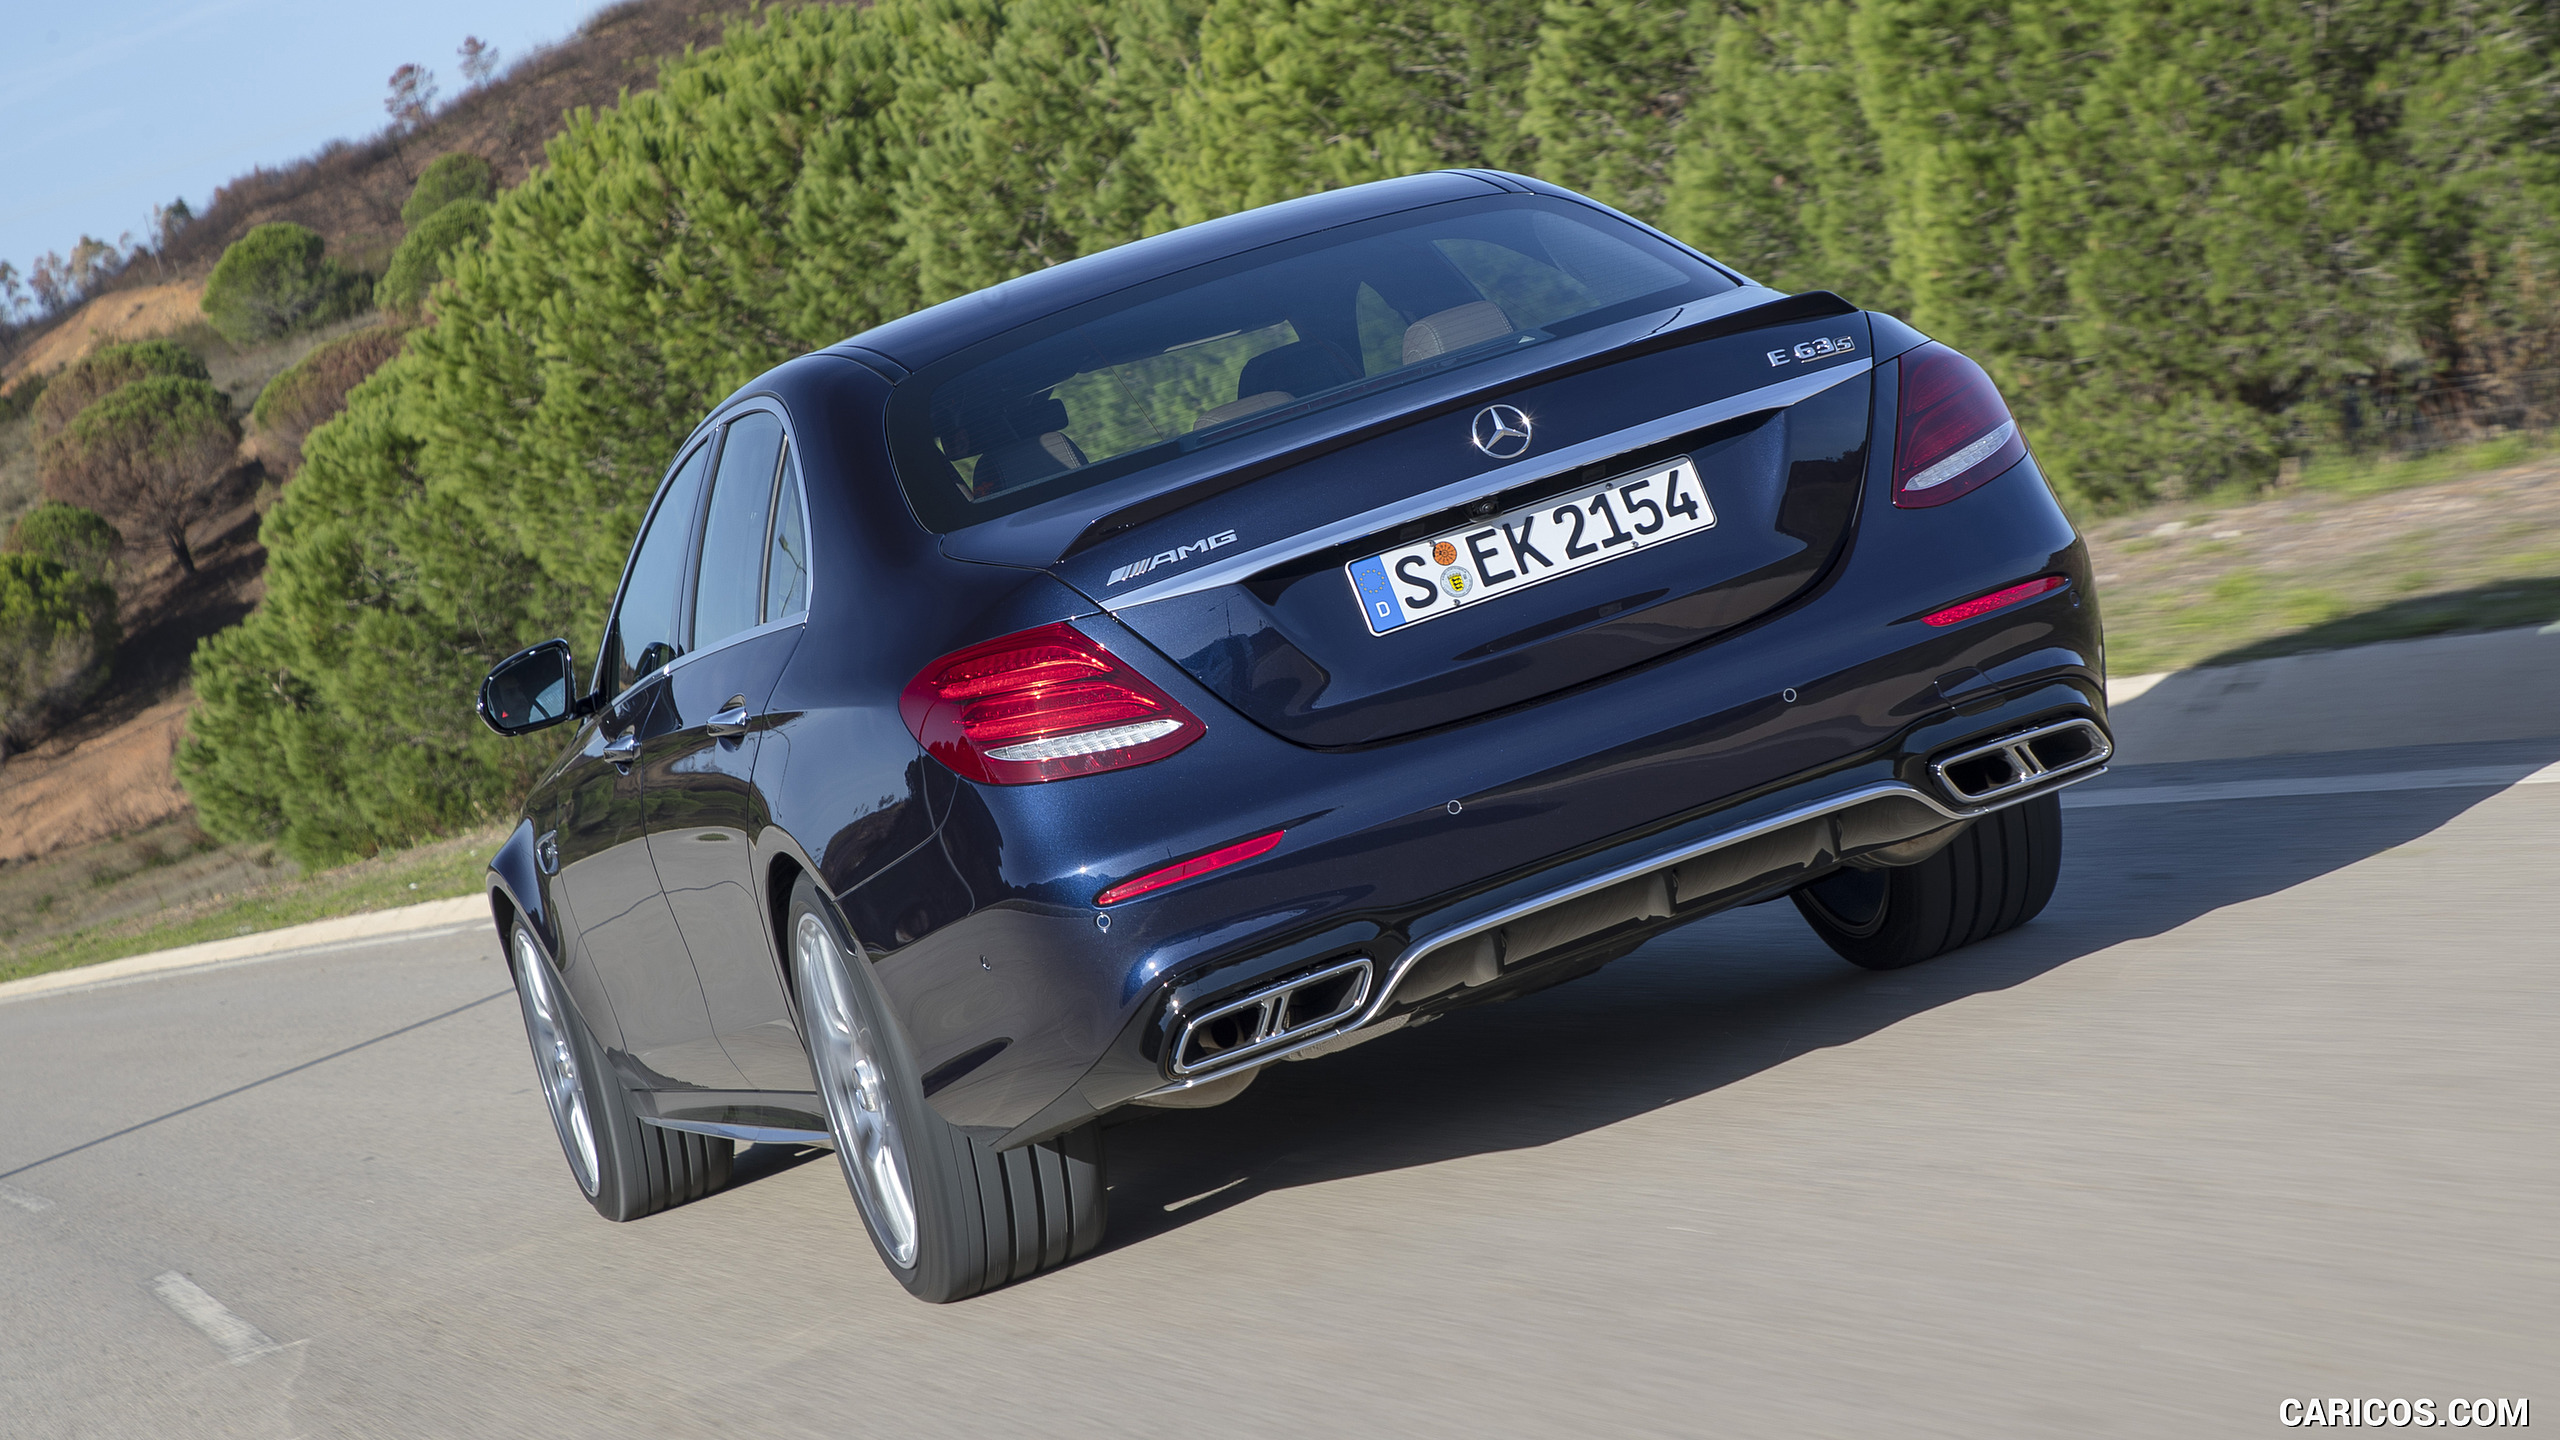 2018 Mercedes-AMG E63 S 4MATIC+ - Rear, #206 of 323